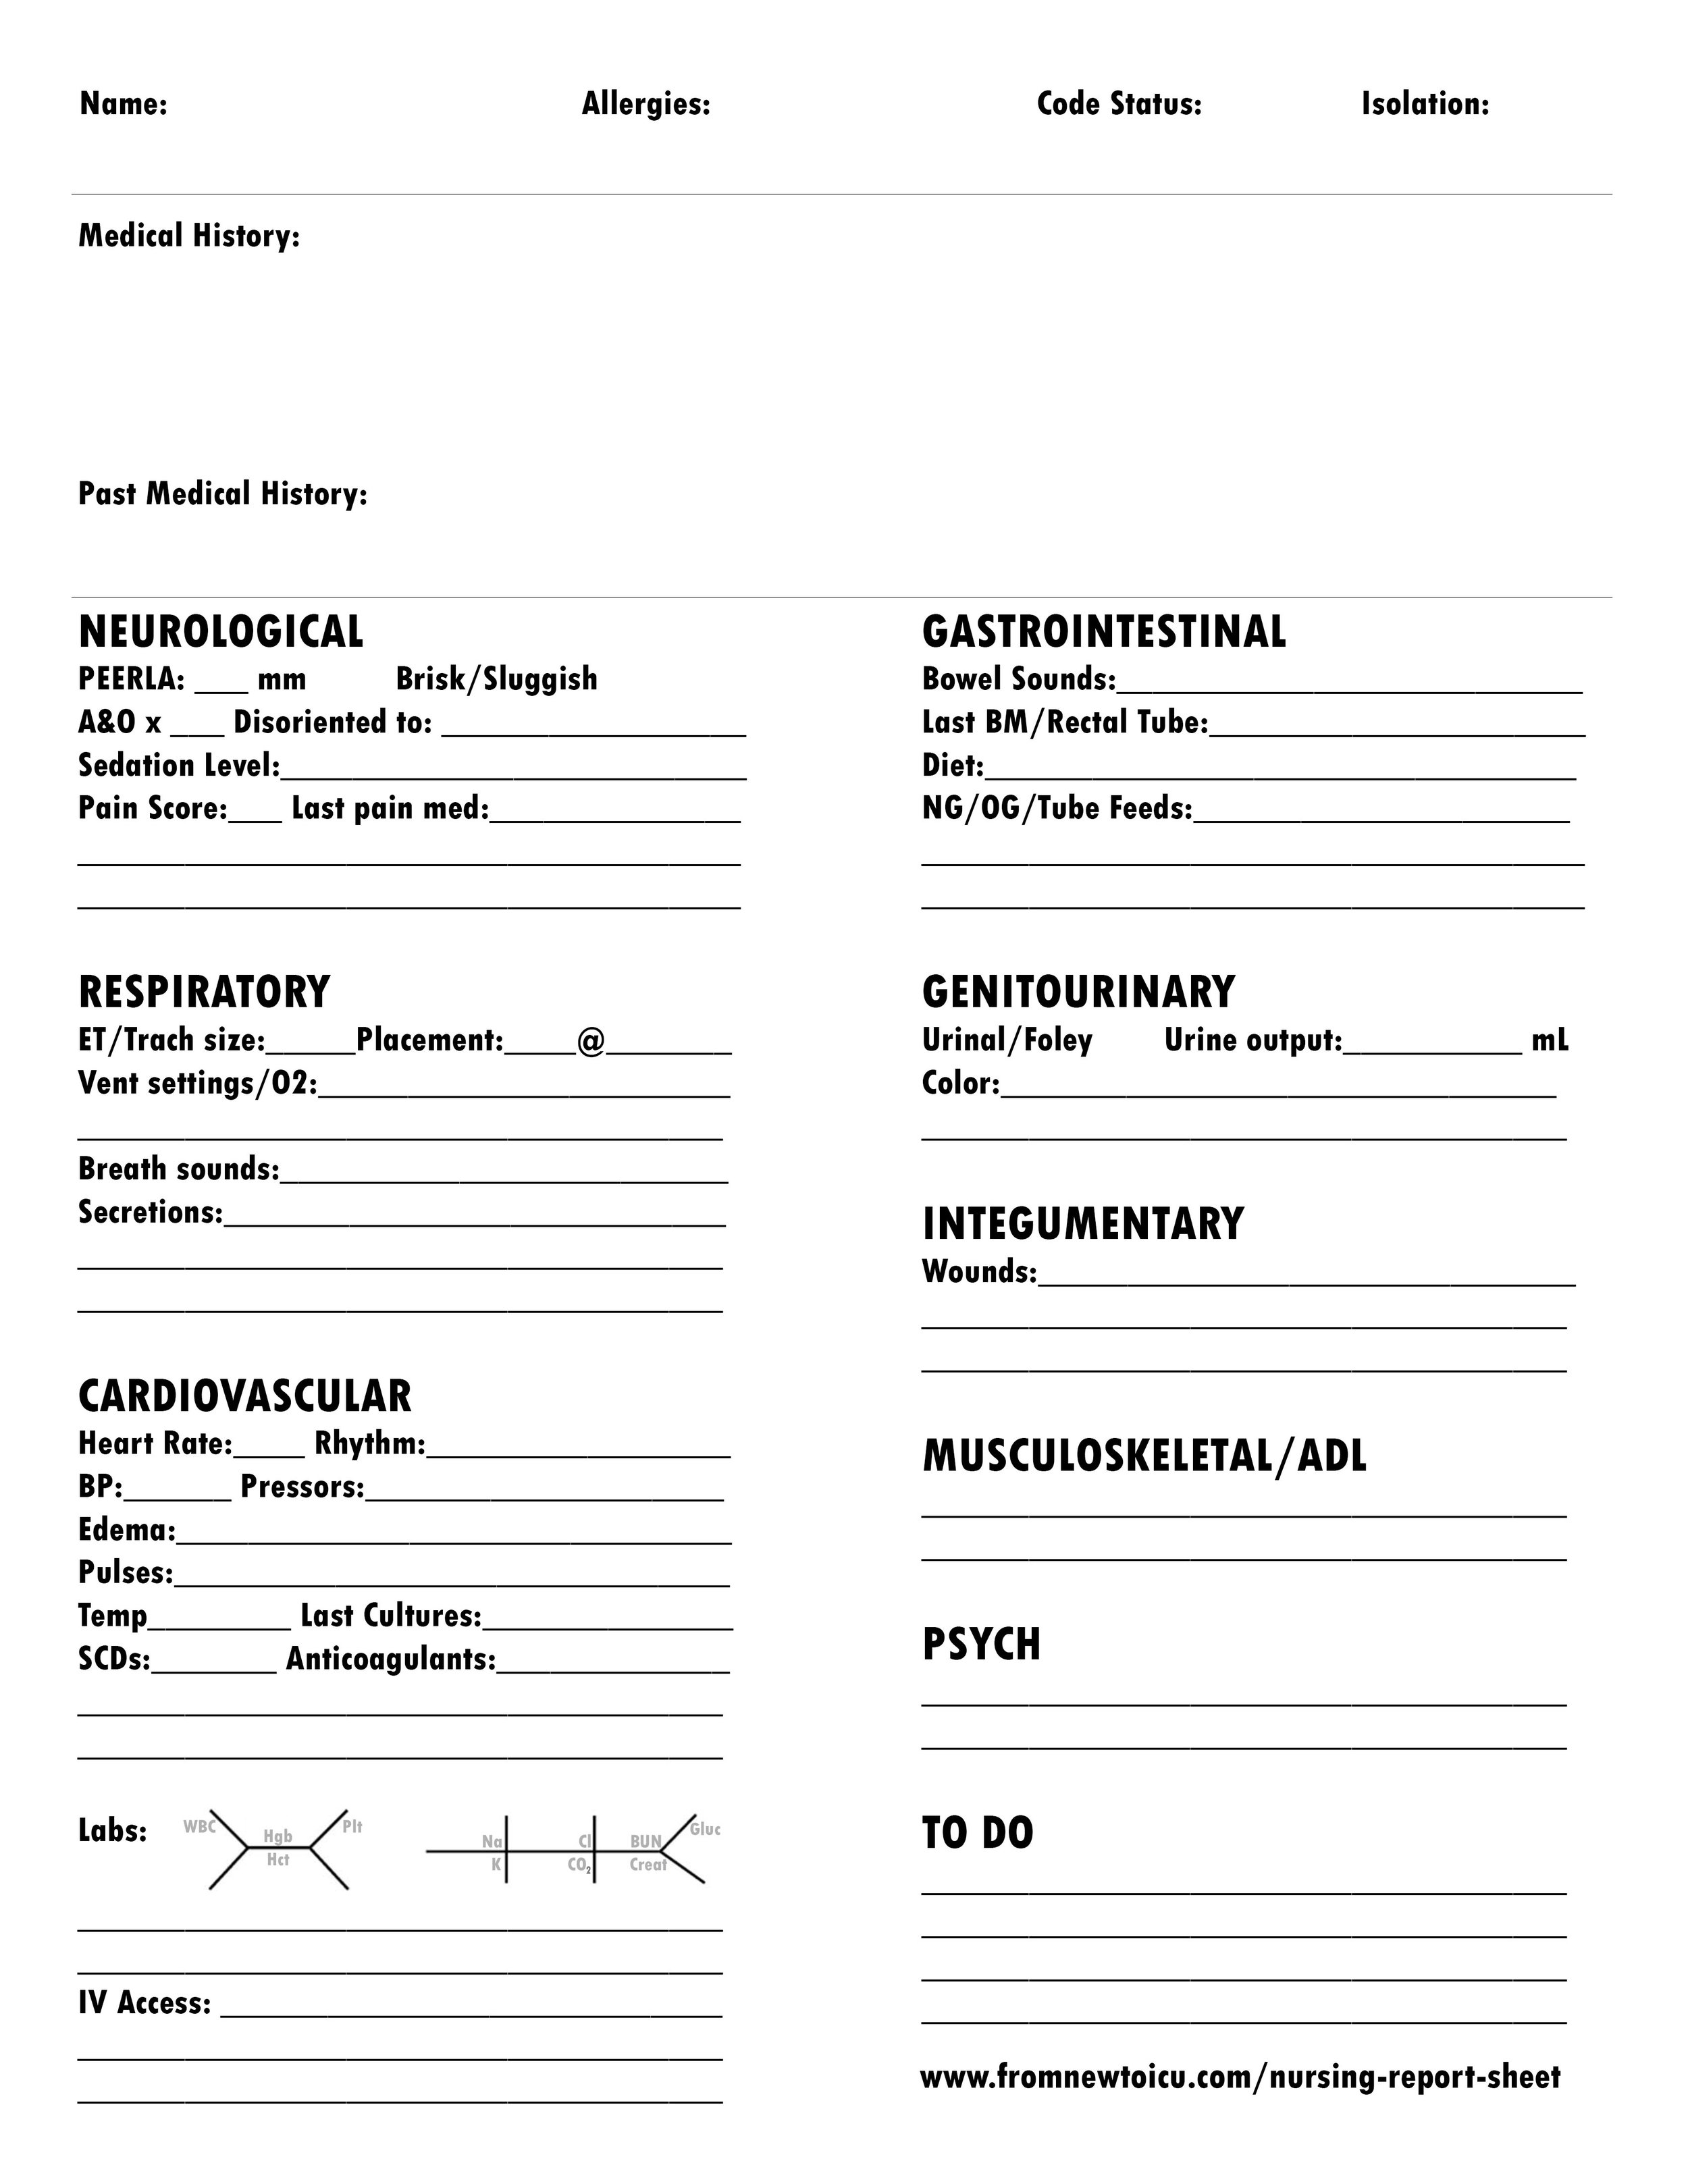 nursing-report-sheet-from-new-to-icu